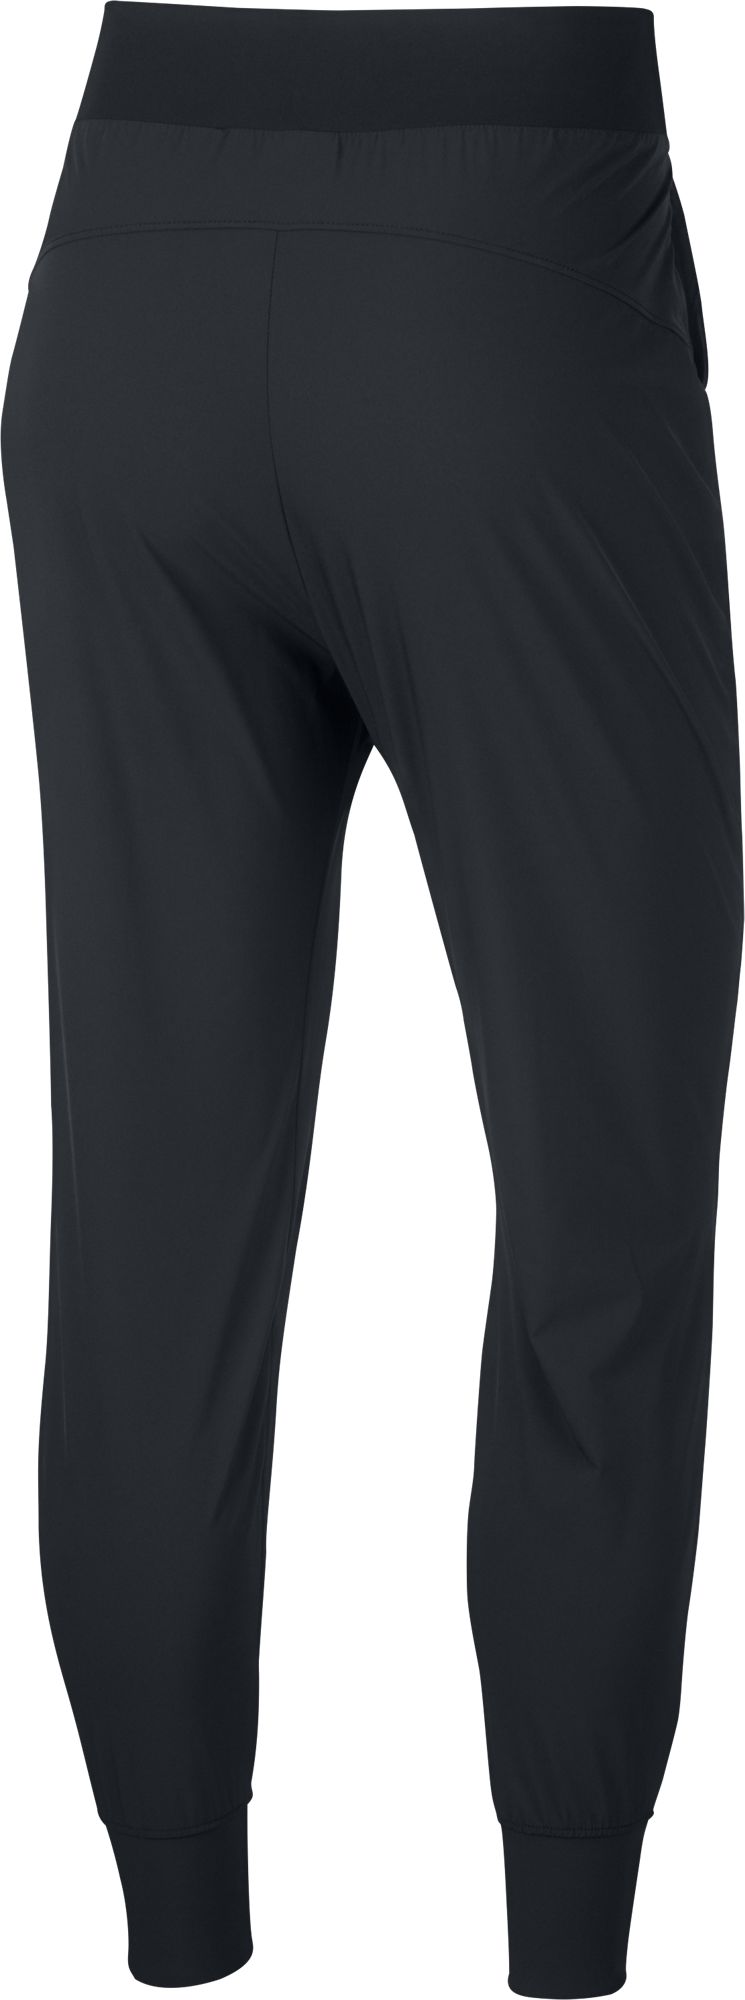 NIKE, W NK BLISS LUXE PANT